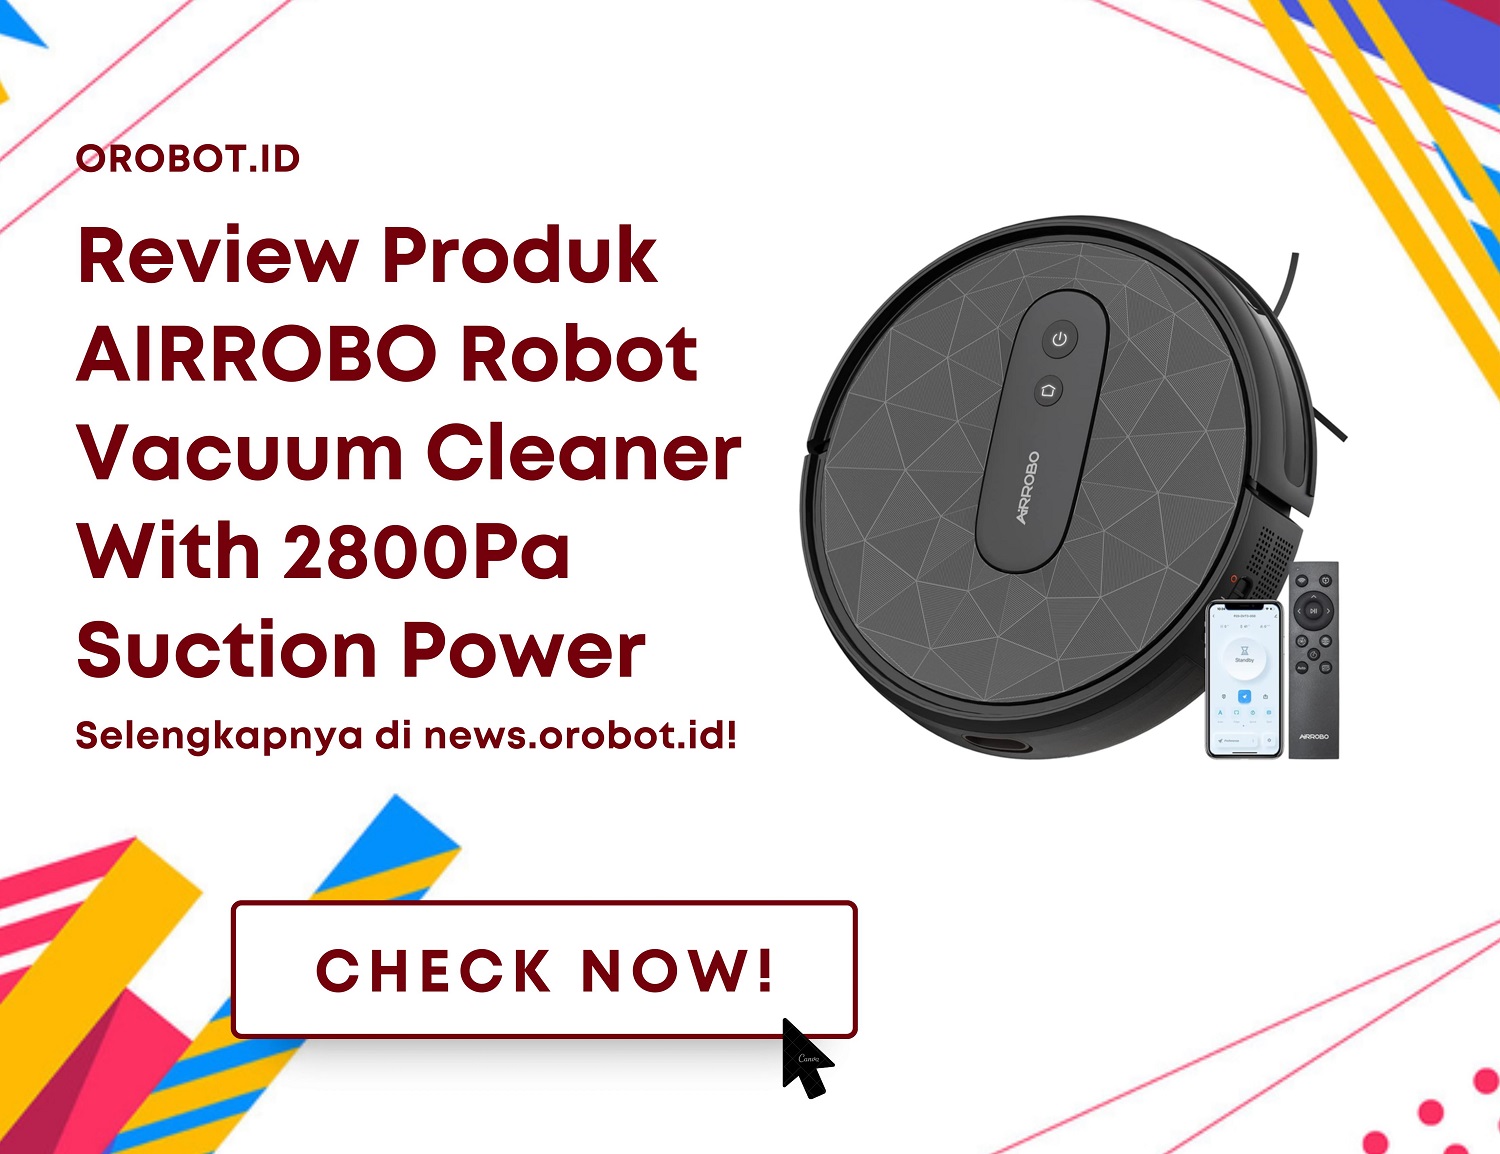 AIRROBO Robot Vacuum Cleaner With 2800Pa Suction Power